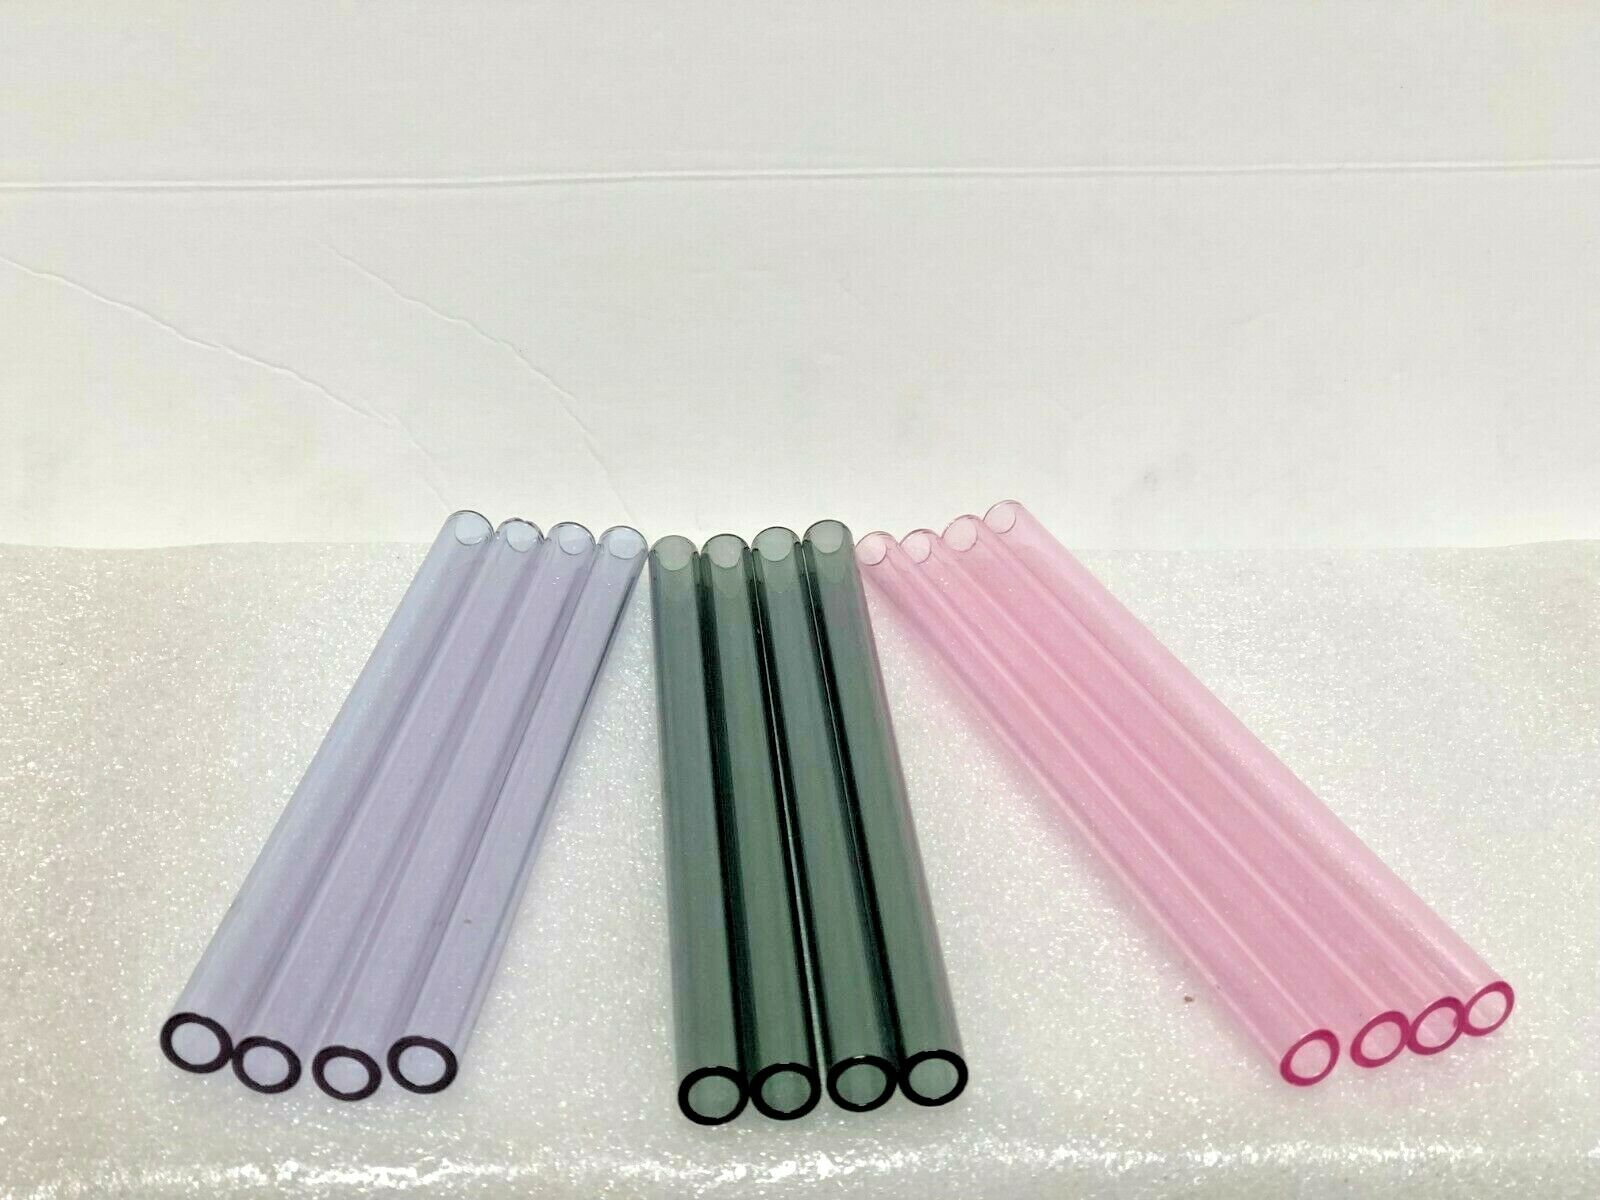 08 Pieces Glass tube Pyrex 12 mm X 2 mm X 12" Long   Blowing tube  ID=8mm  Color Pyrex Does Not Apply - фотография #3